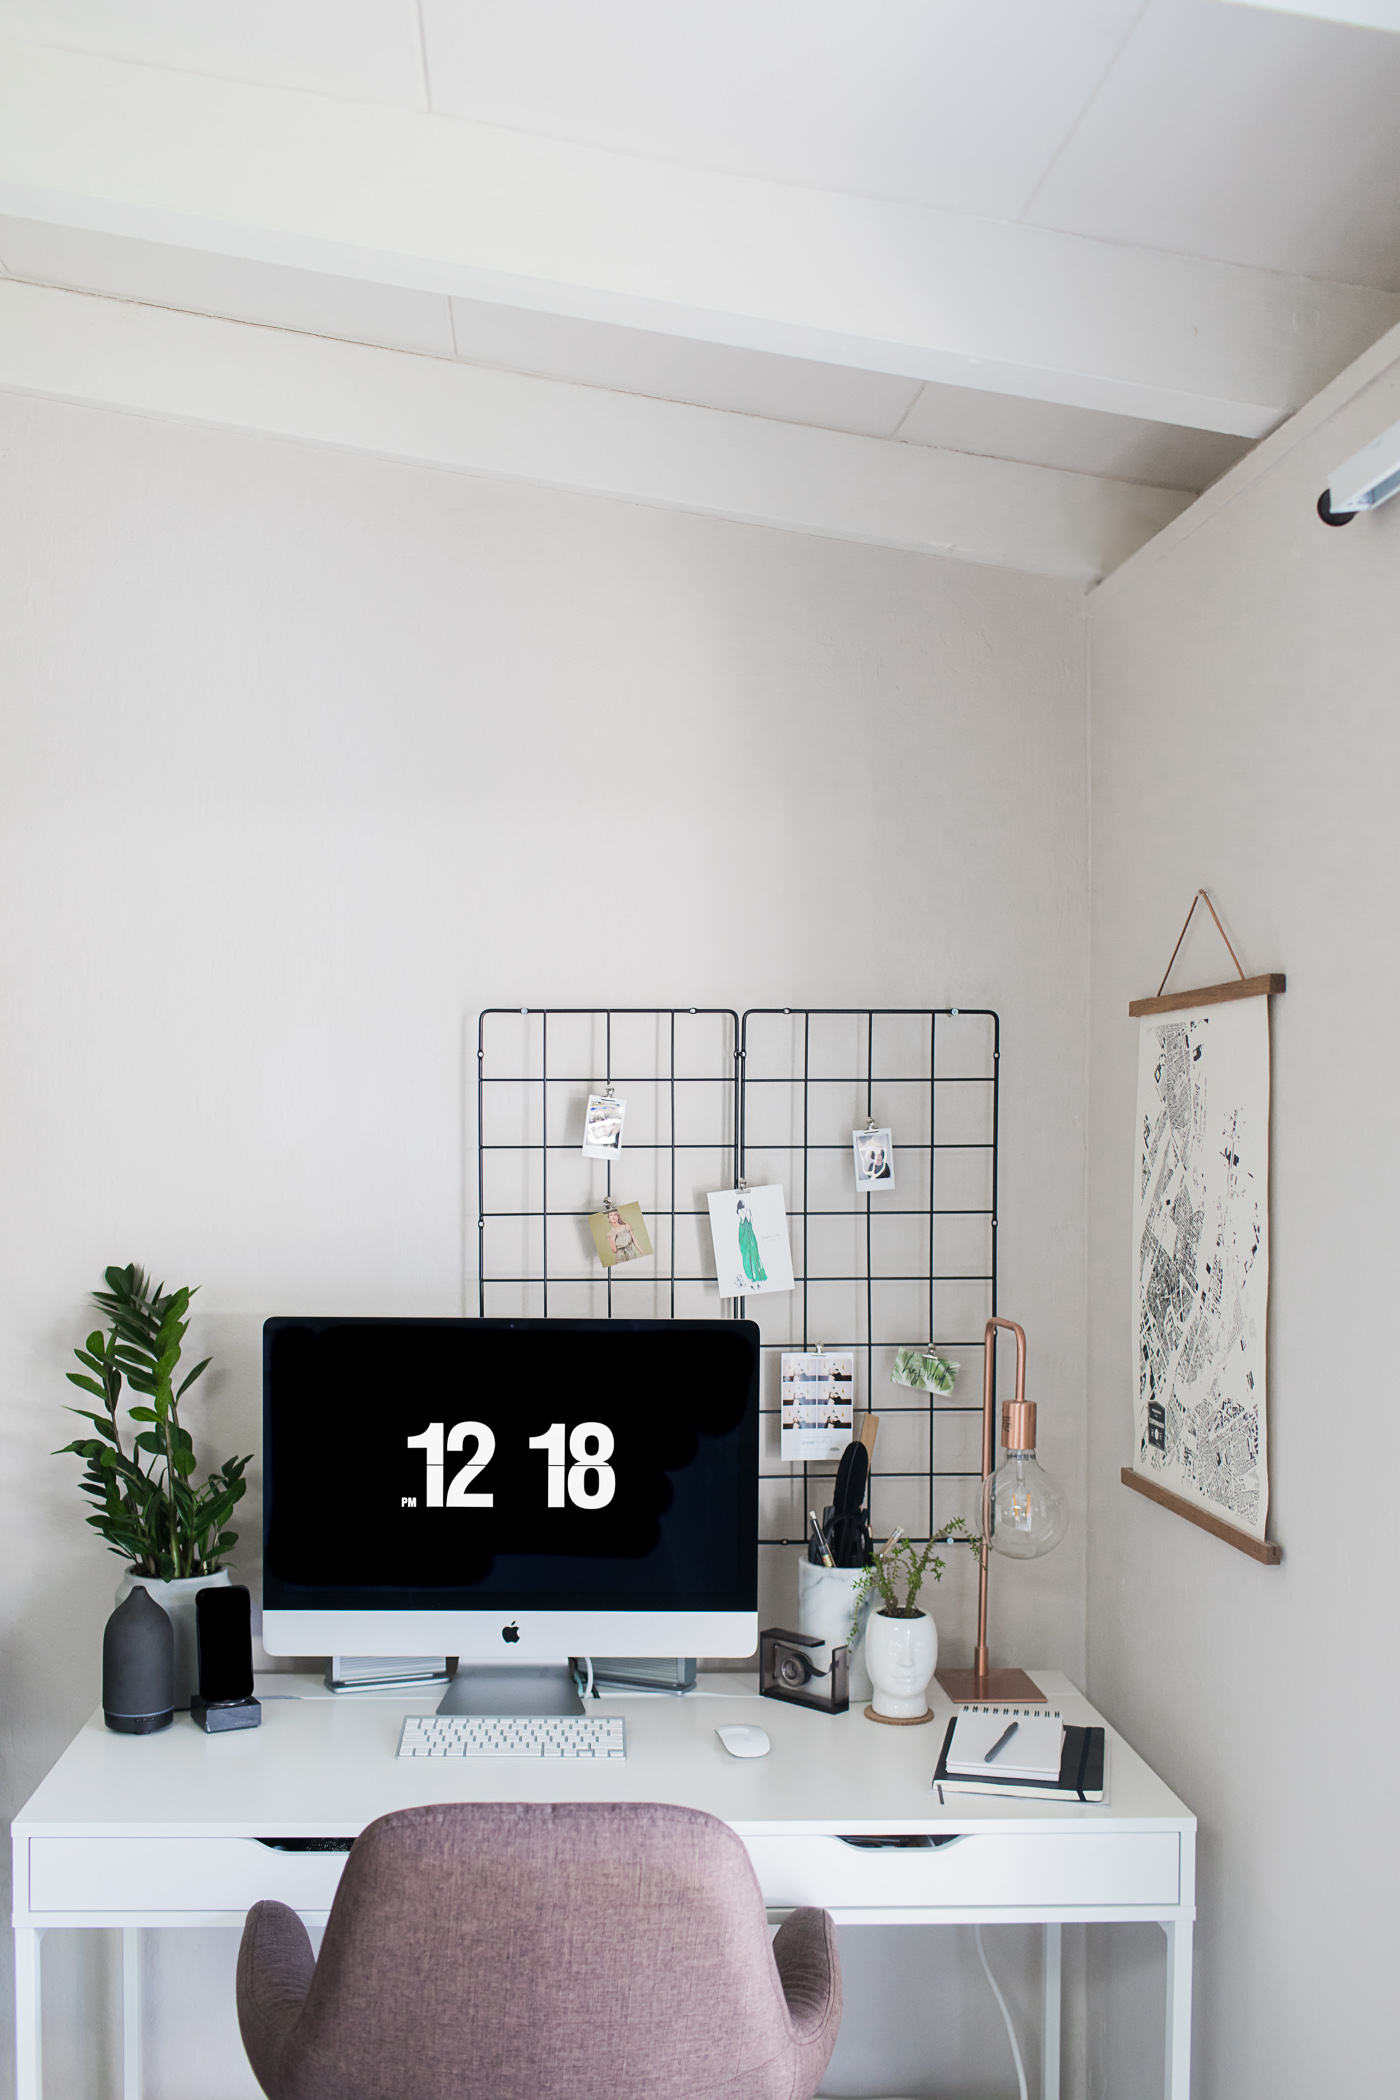 Work At Home Office, 5 easy tips to make your home office the most productive and happy space in your home.